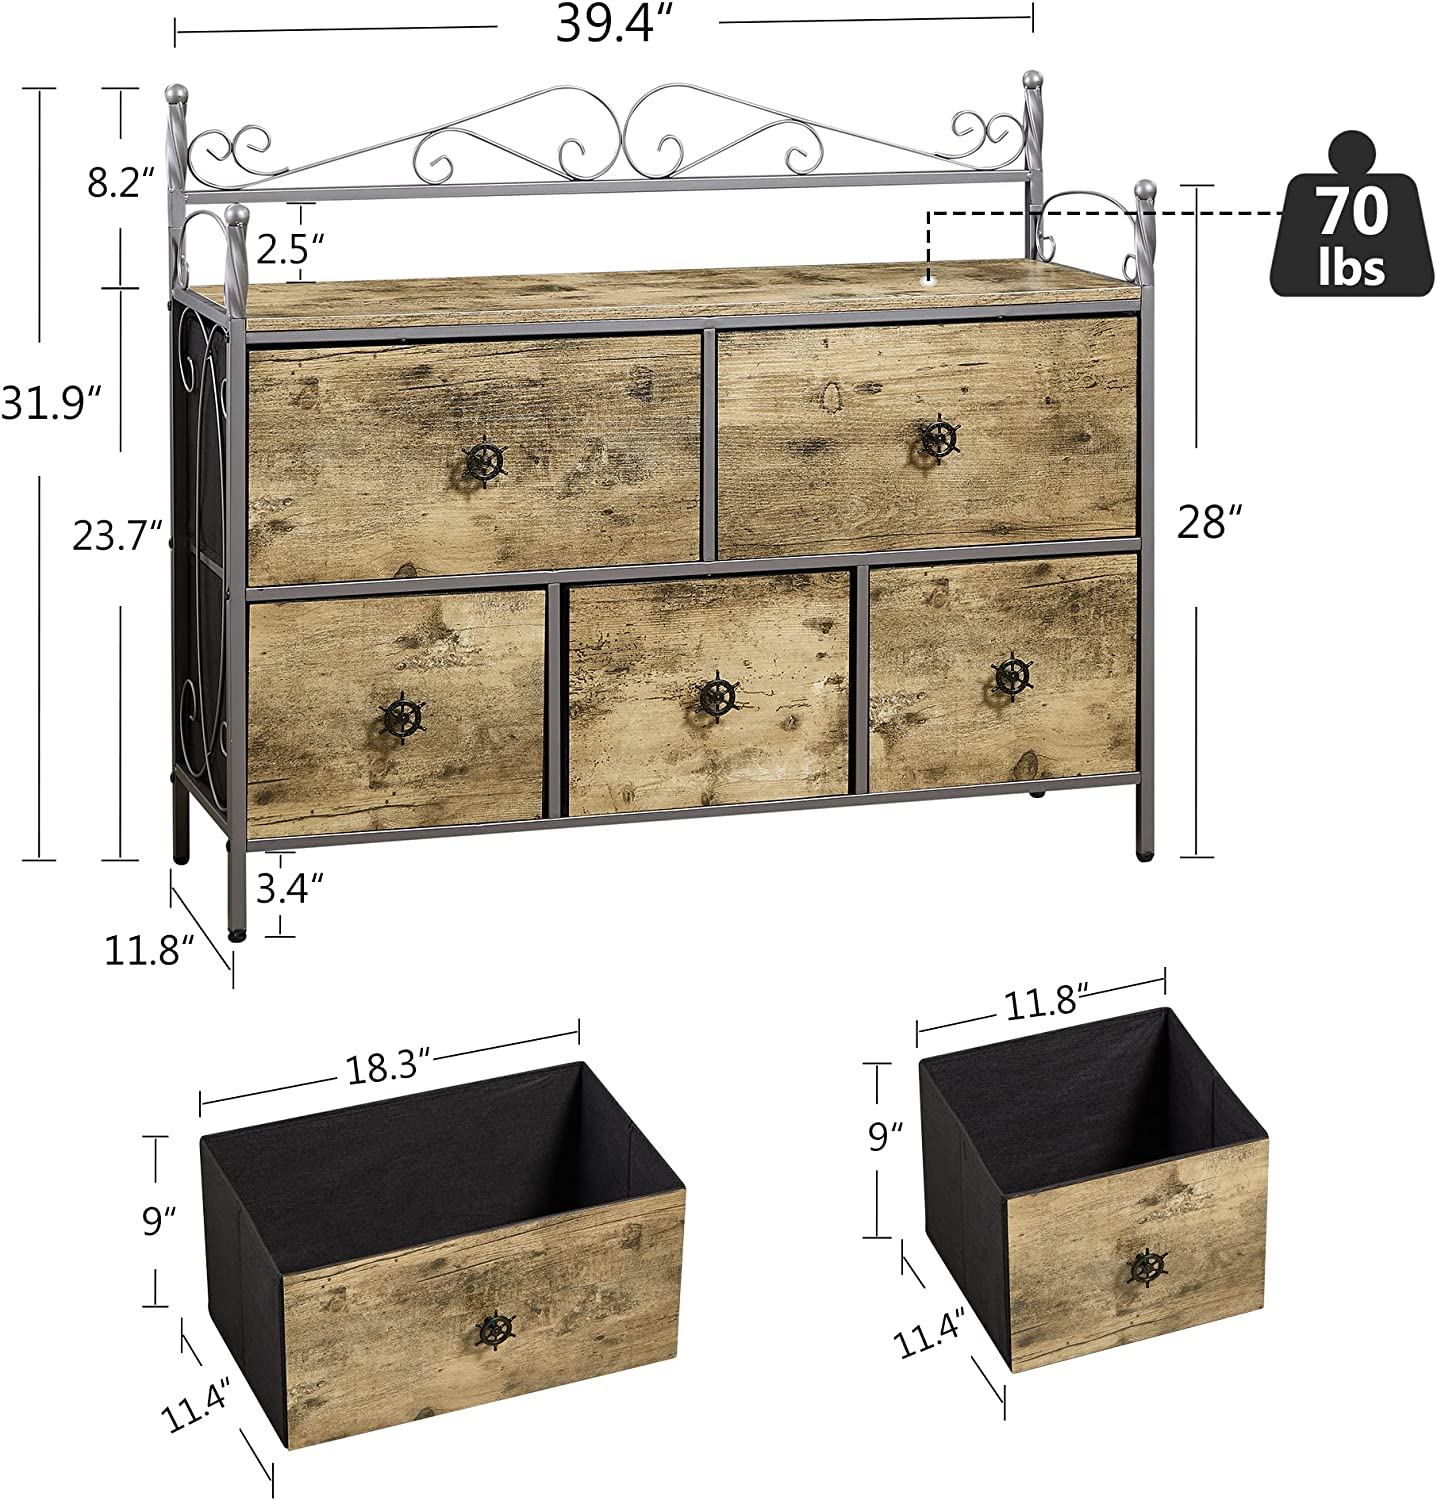 VECELO Dresser for Bedroom with 5 Drawers, Storage Organizer Unit with Shelf for Closet, Living Room